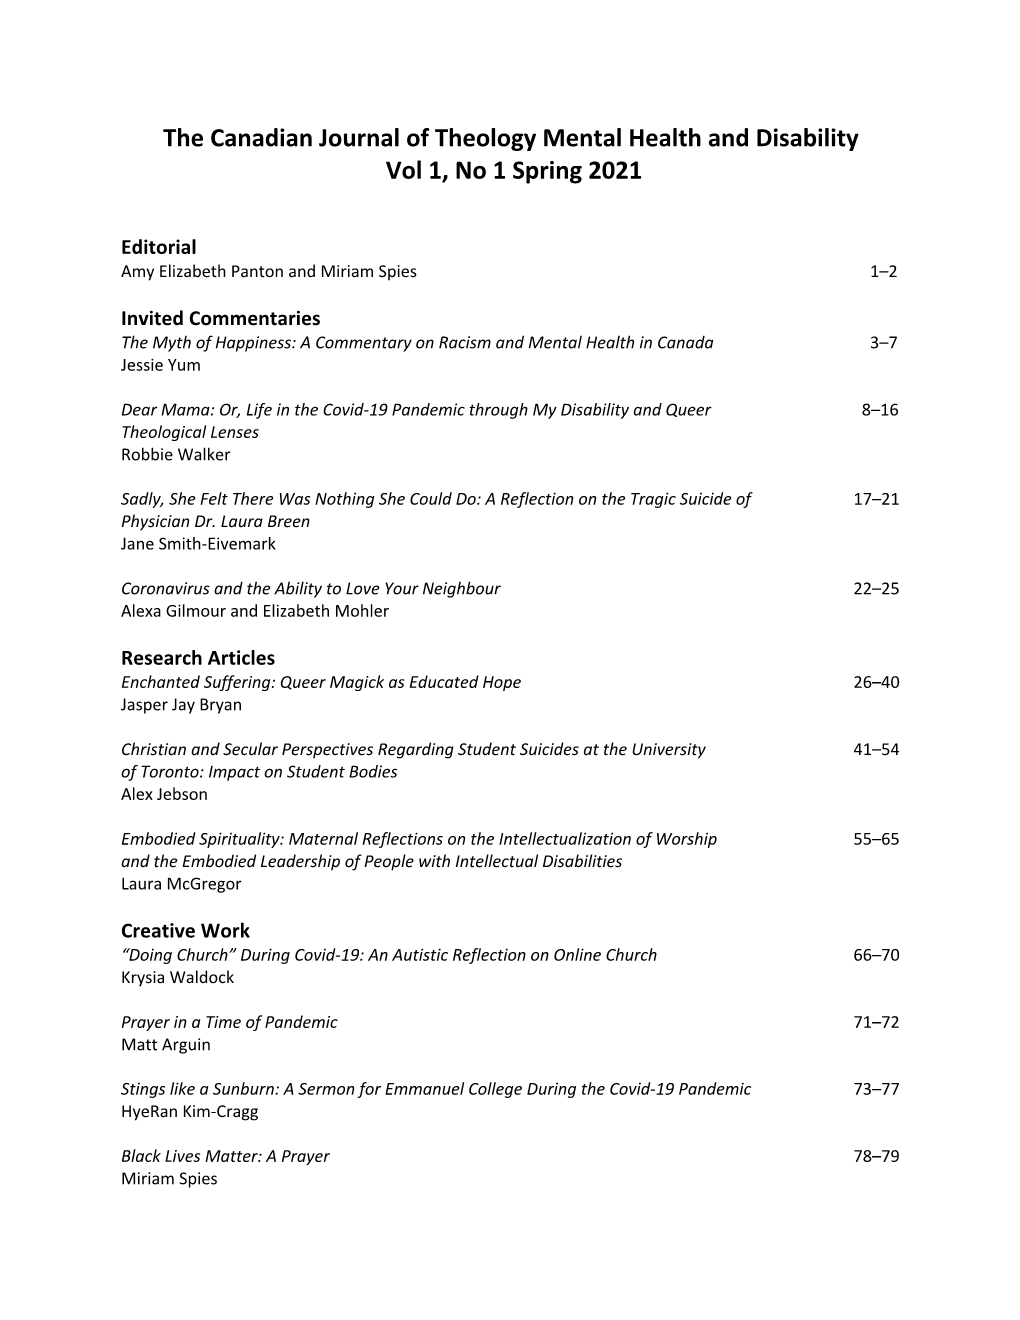 The Canadian Journal of Theology Mental Health and Disability Vol 1, No 1 Spring 2021